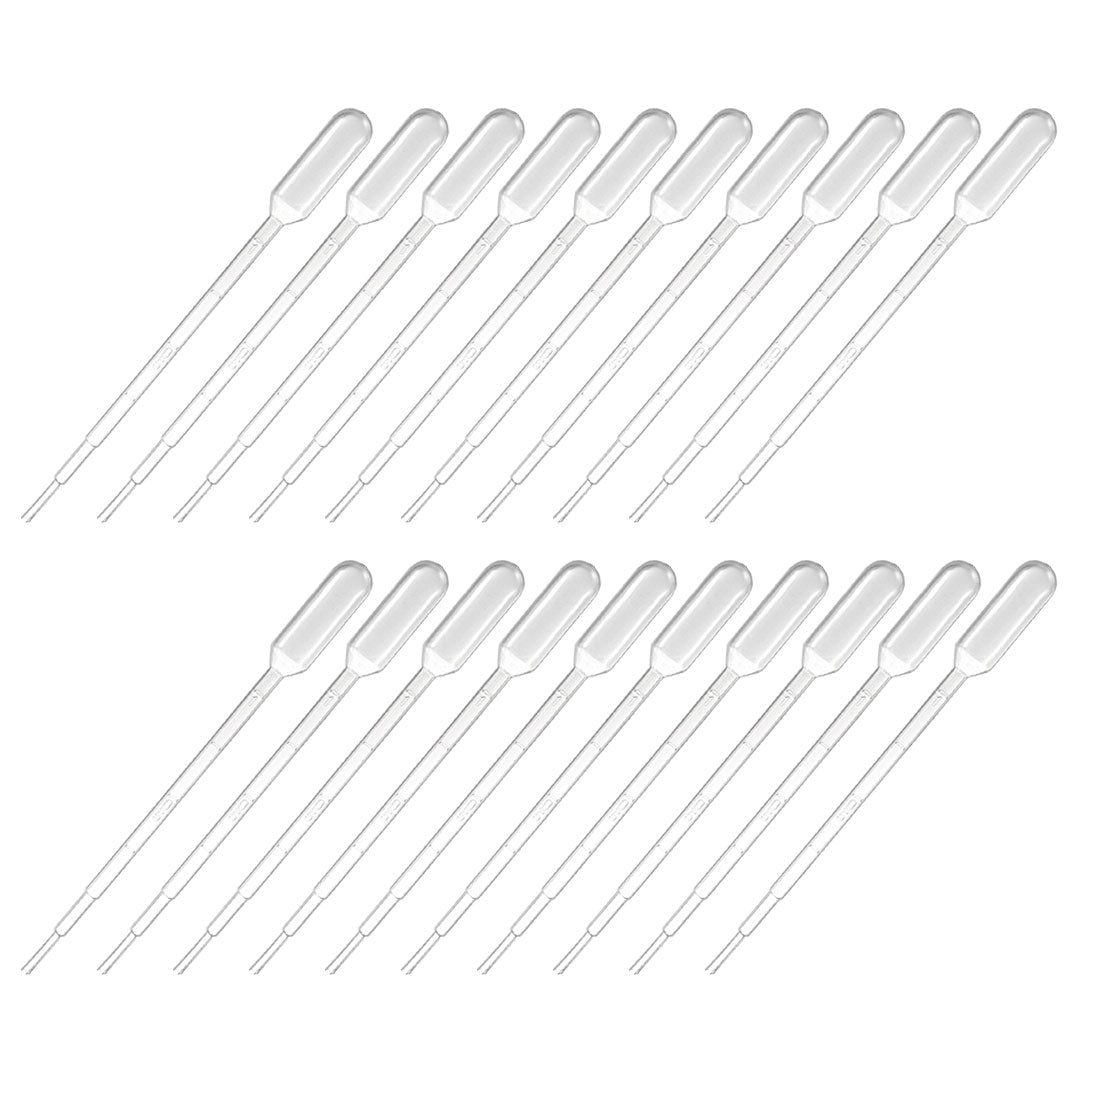 uxcell Uxcell 100 Pcs 1ml Disposable Pasteur Pipettes Test Tubes Liquid Drop Droppers Graduated 144mm Long